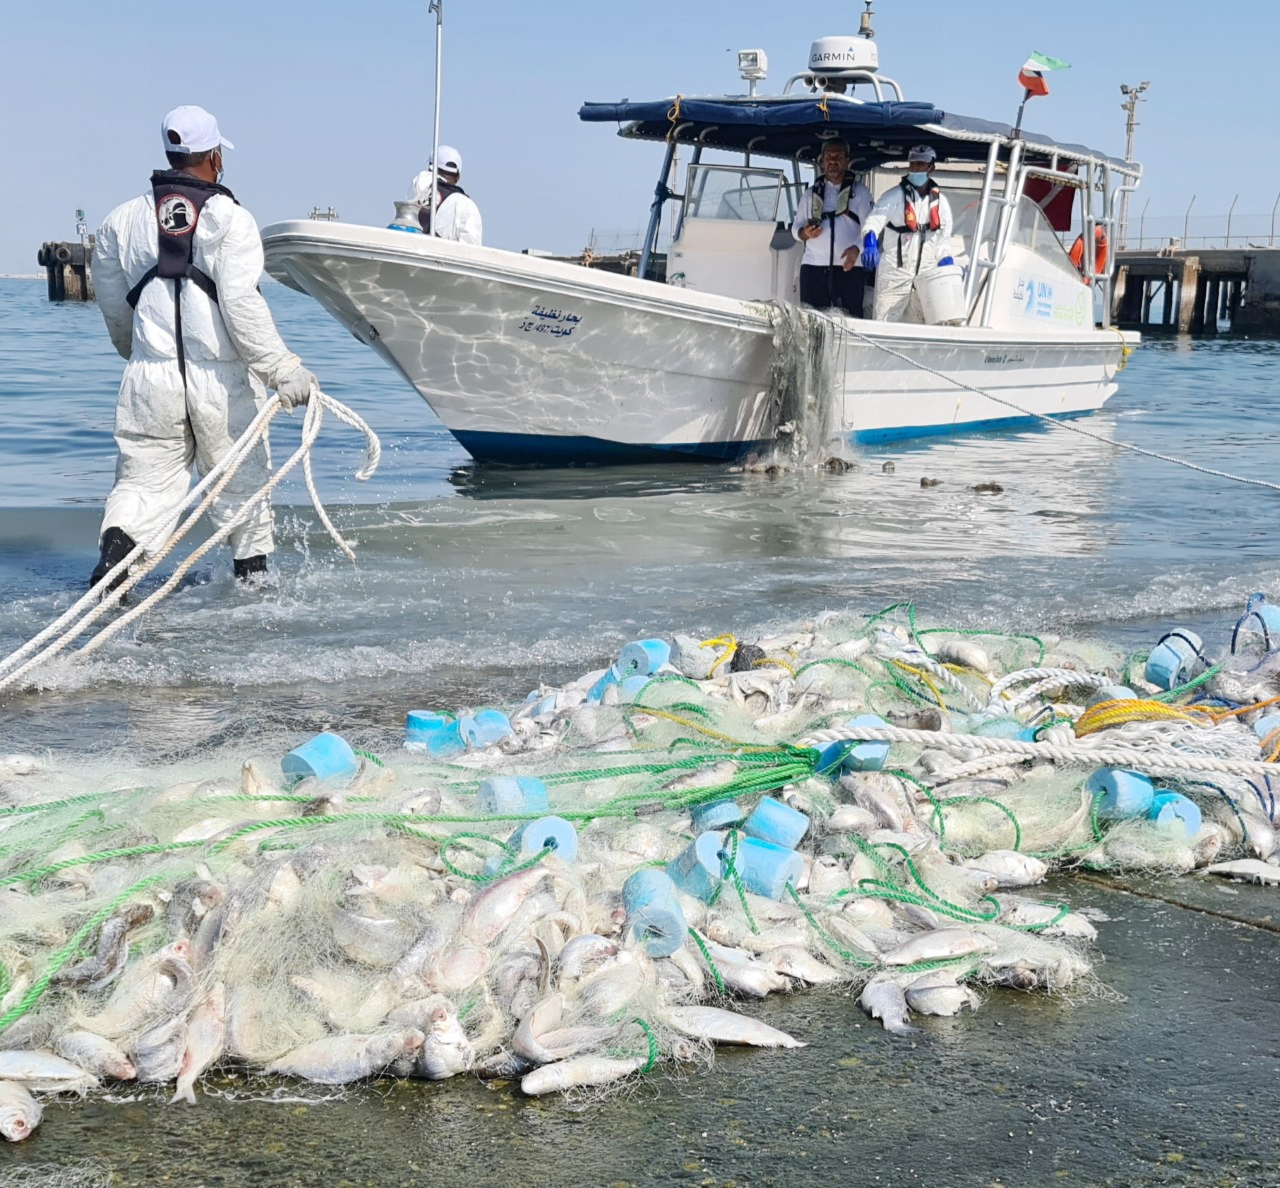 Kuwait diving team lifts discarded fishing nets south of Kuwait's Creek 